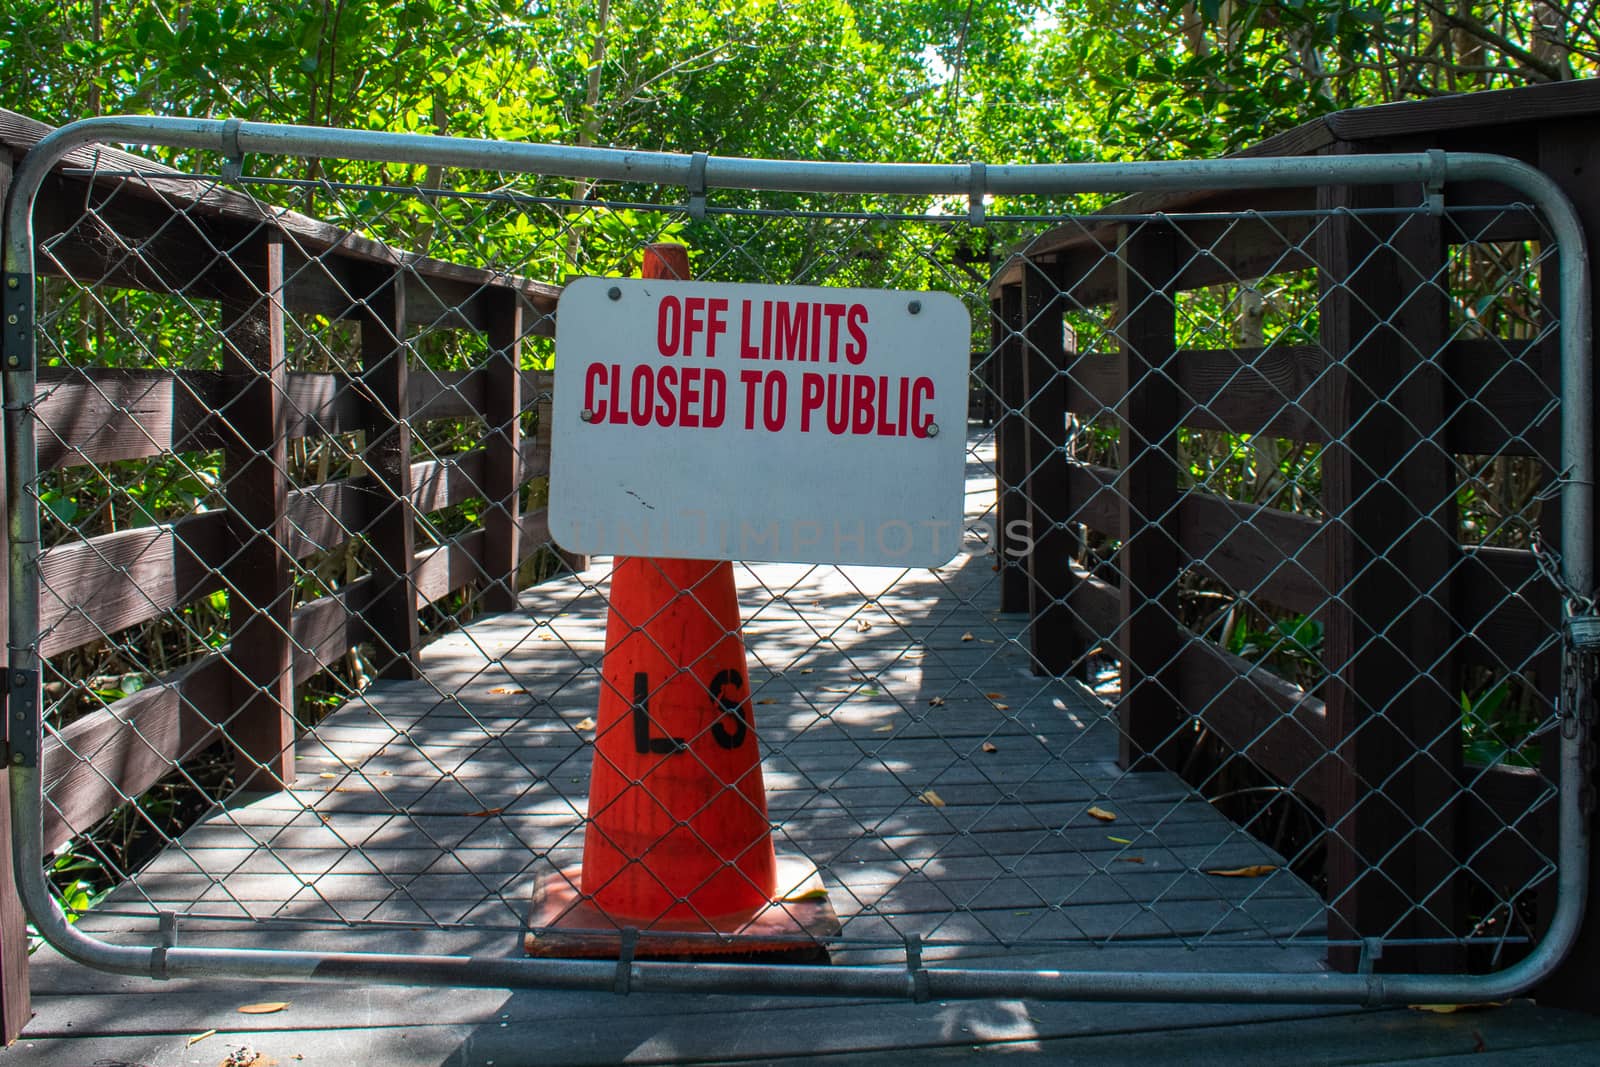 A Boardwalk With a Fenced Off Section With a Traffic Cone Behind It Stating That It's Off Limits to the Public